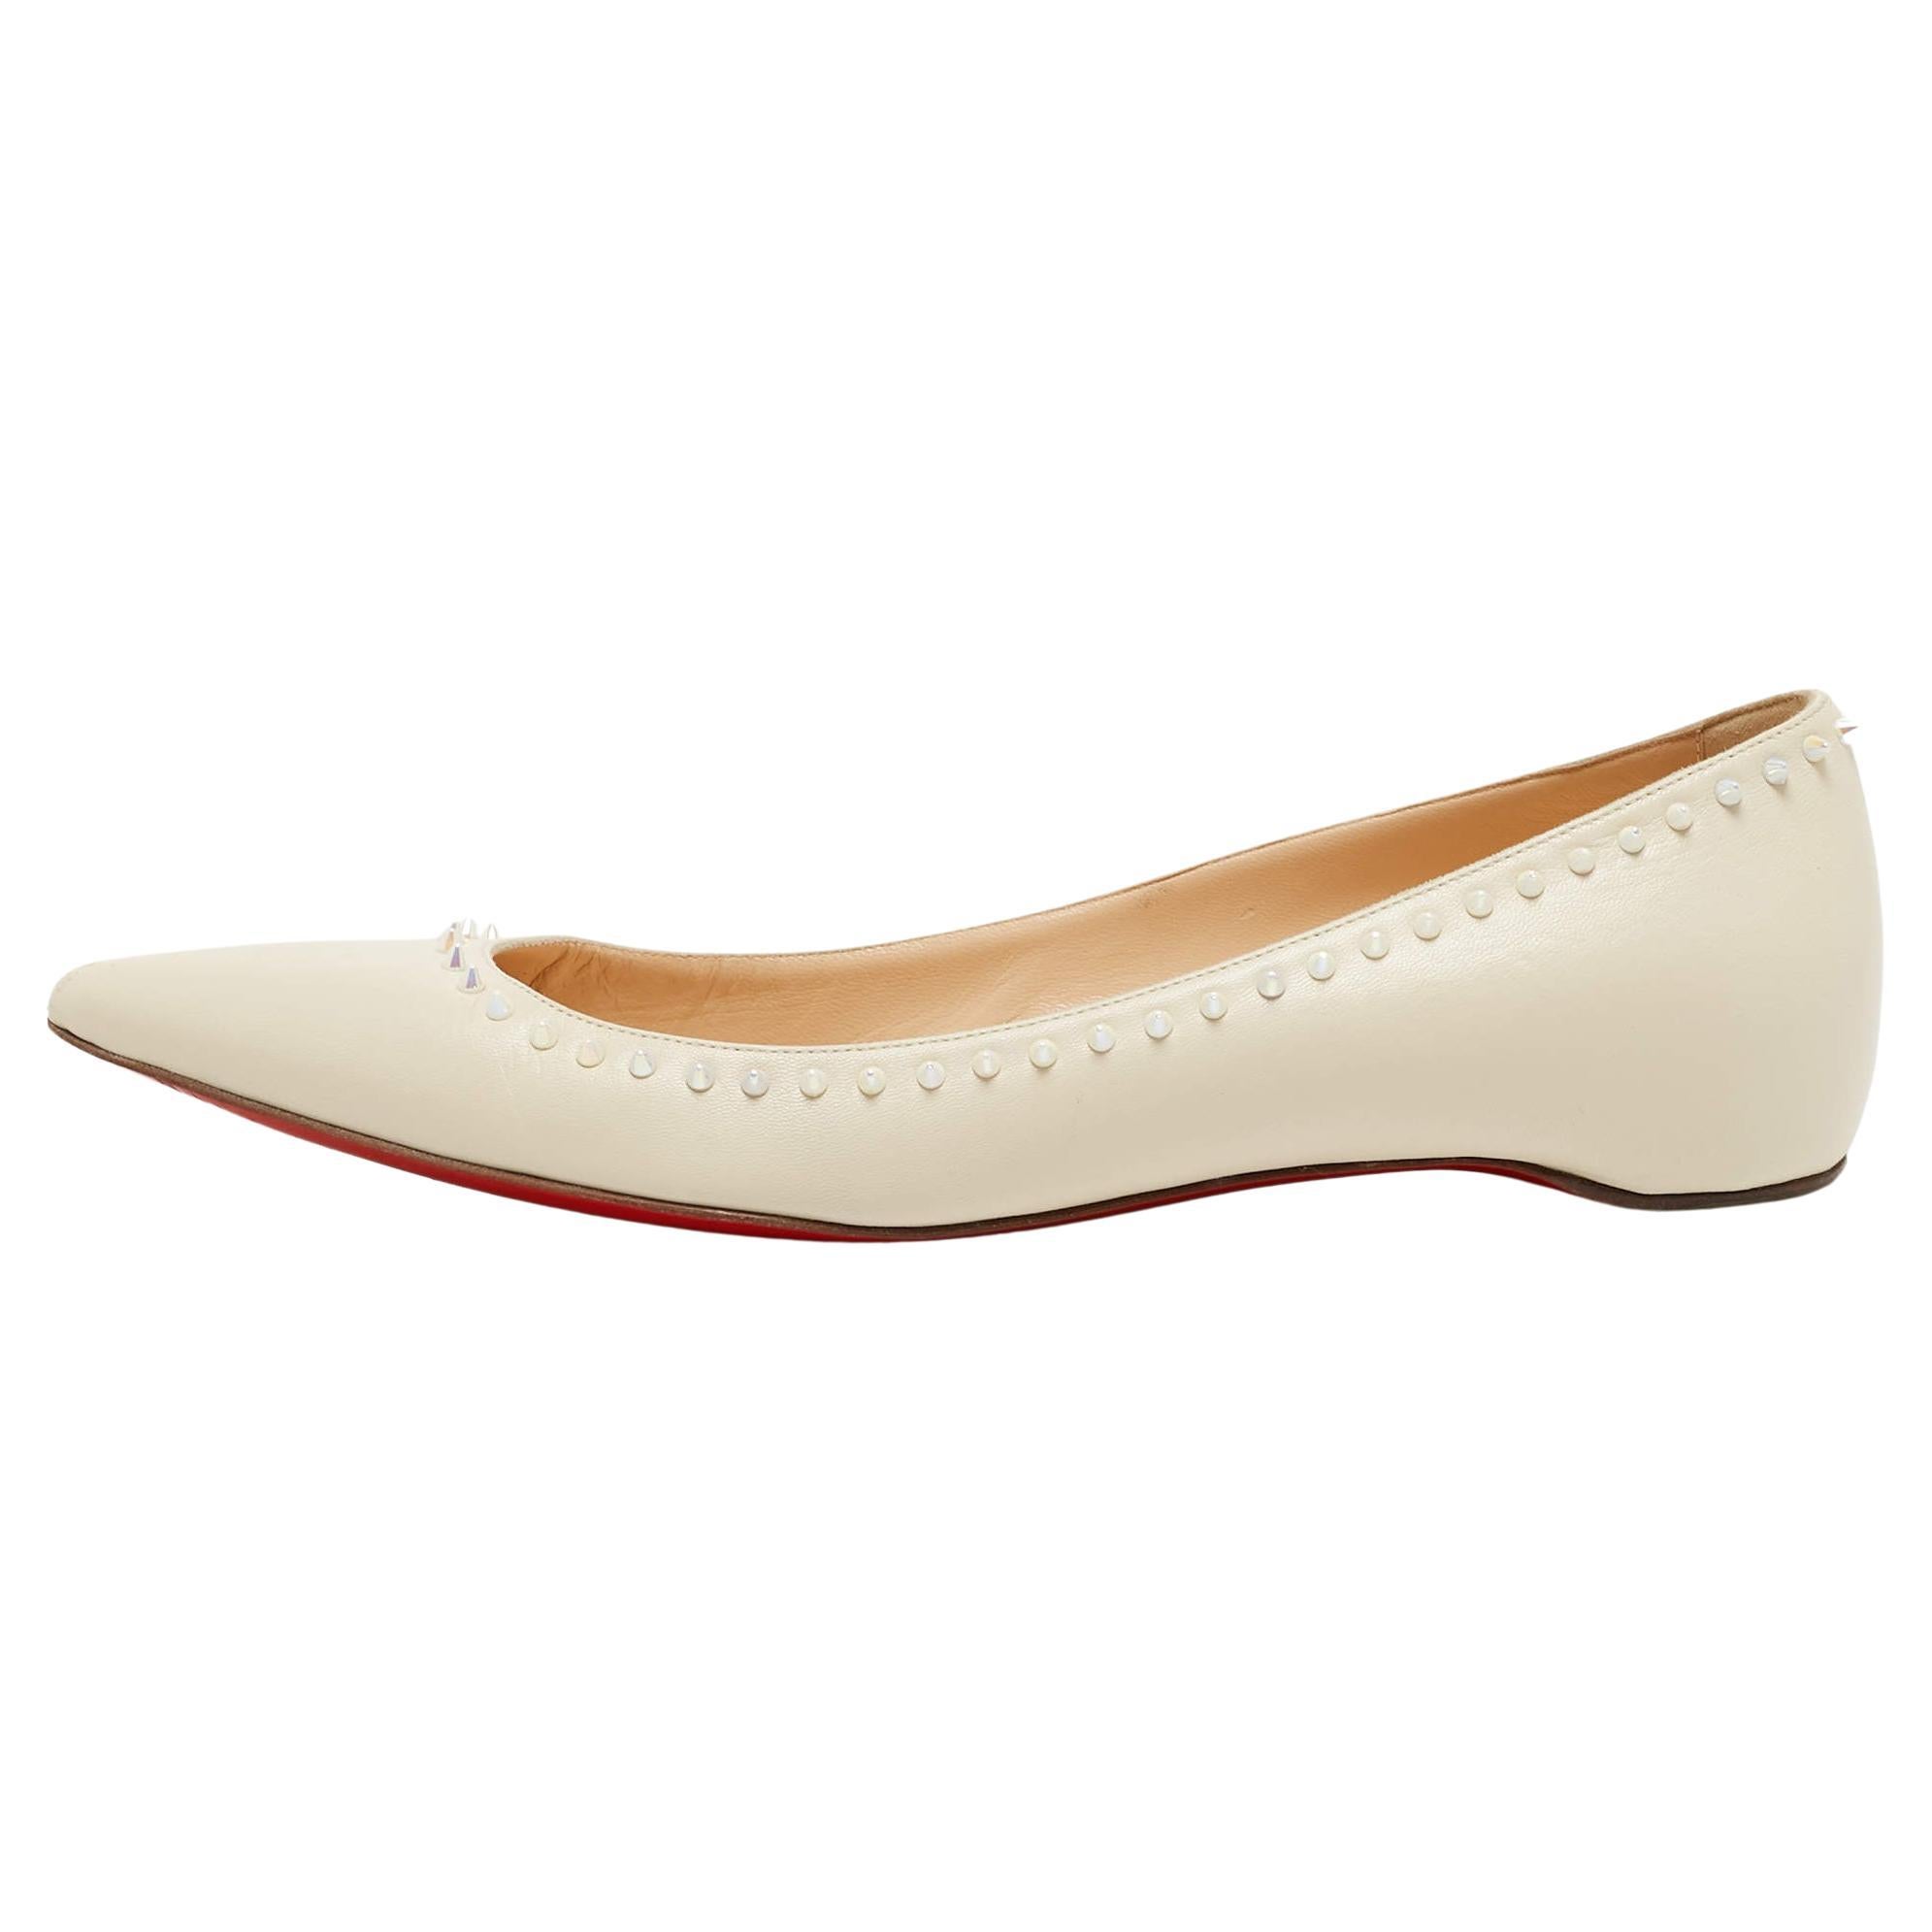 Christian Louboutin Cream Leather Anjalina Ballet Flats Size 39 For Sale